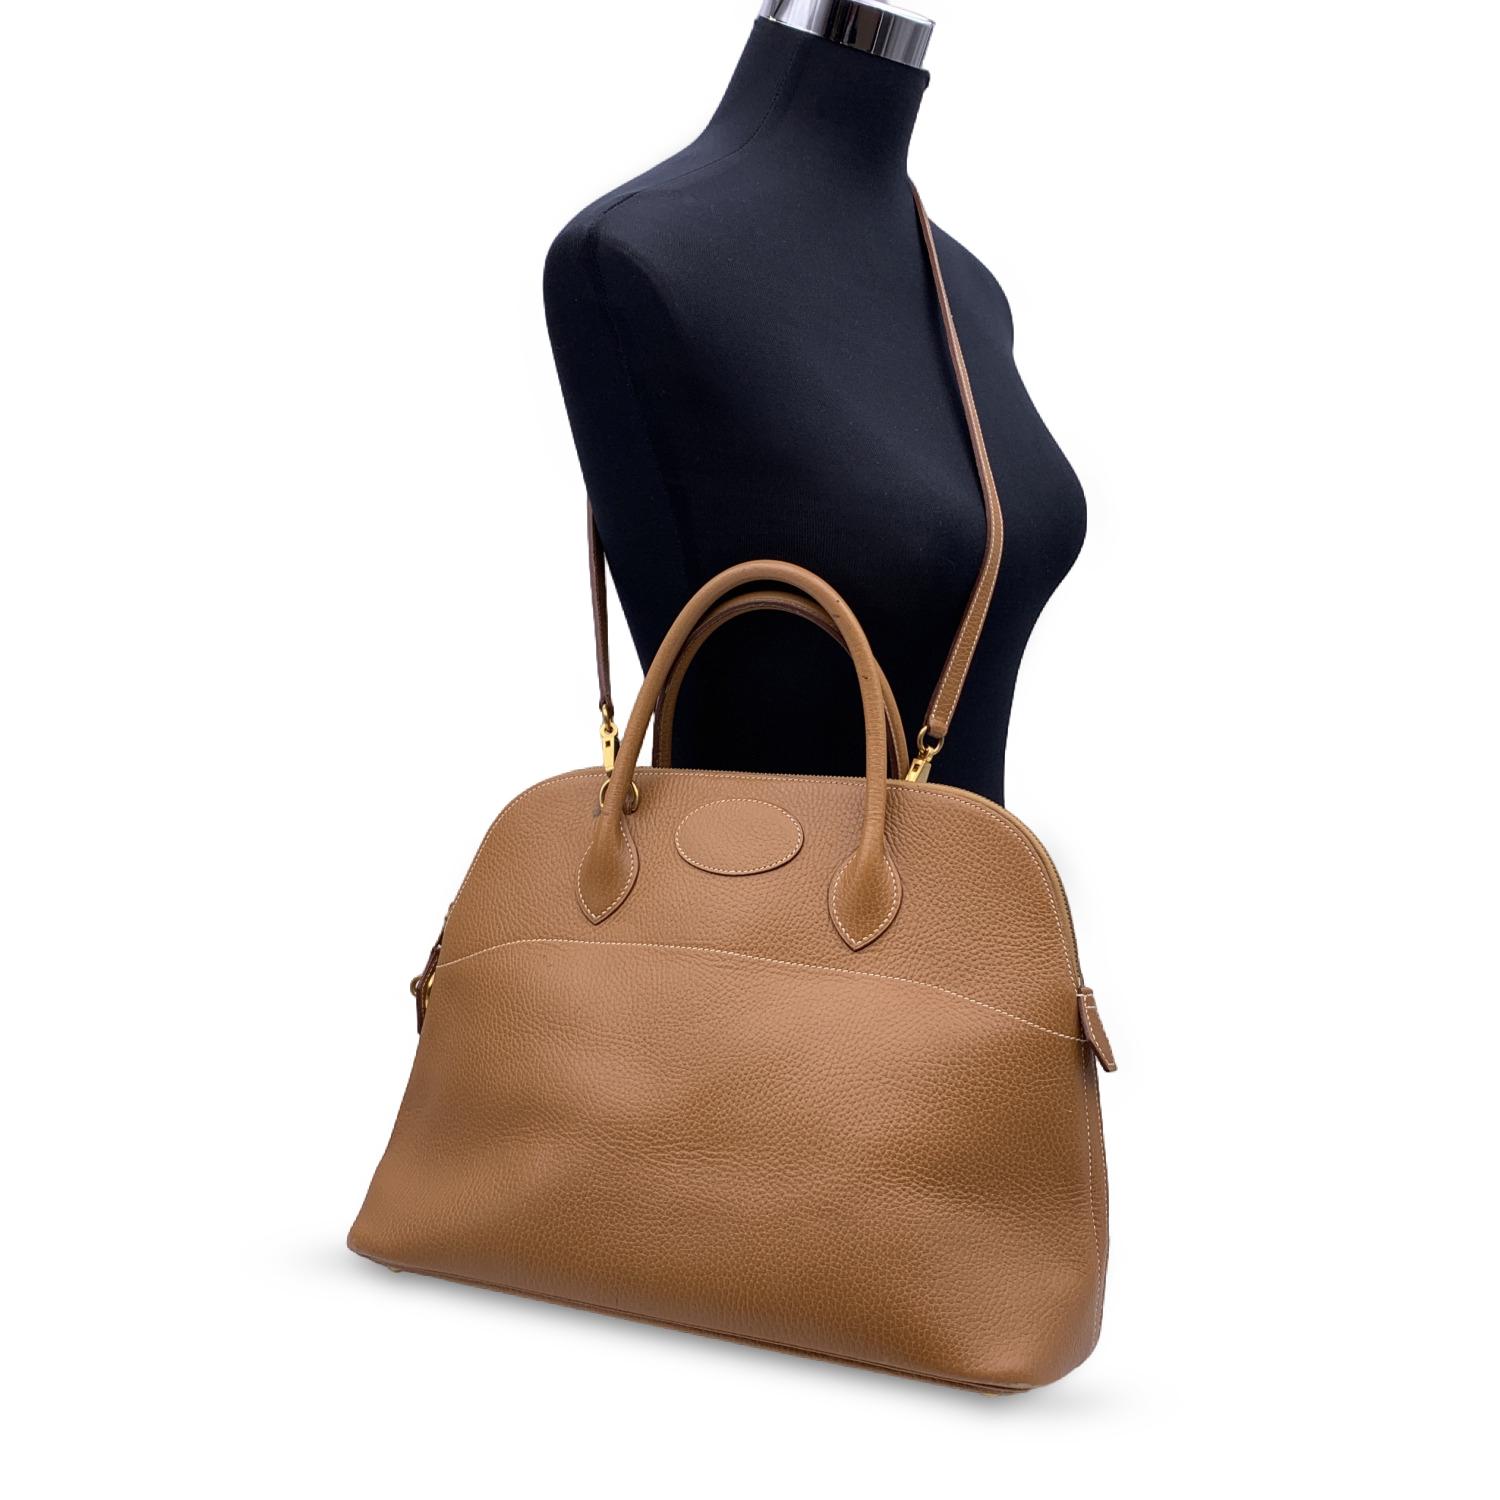 Sophisticated and timeless Hermes BOLIDE BAG crafted in beige leather (Chamonix leather in Cognac color) from the 1994 (blind stamp is 'X' encased in a circle). It features a doomed top with double top rolled leather handles and removable shoulder